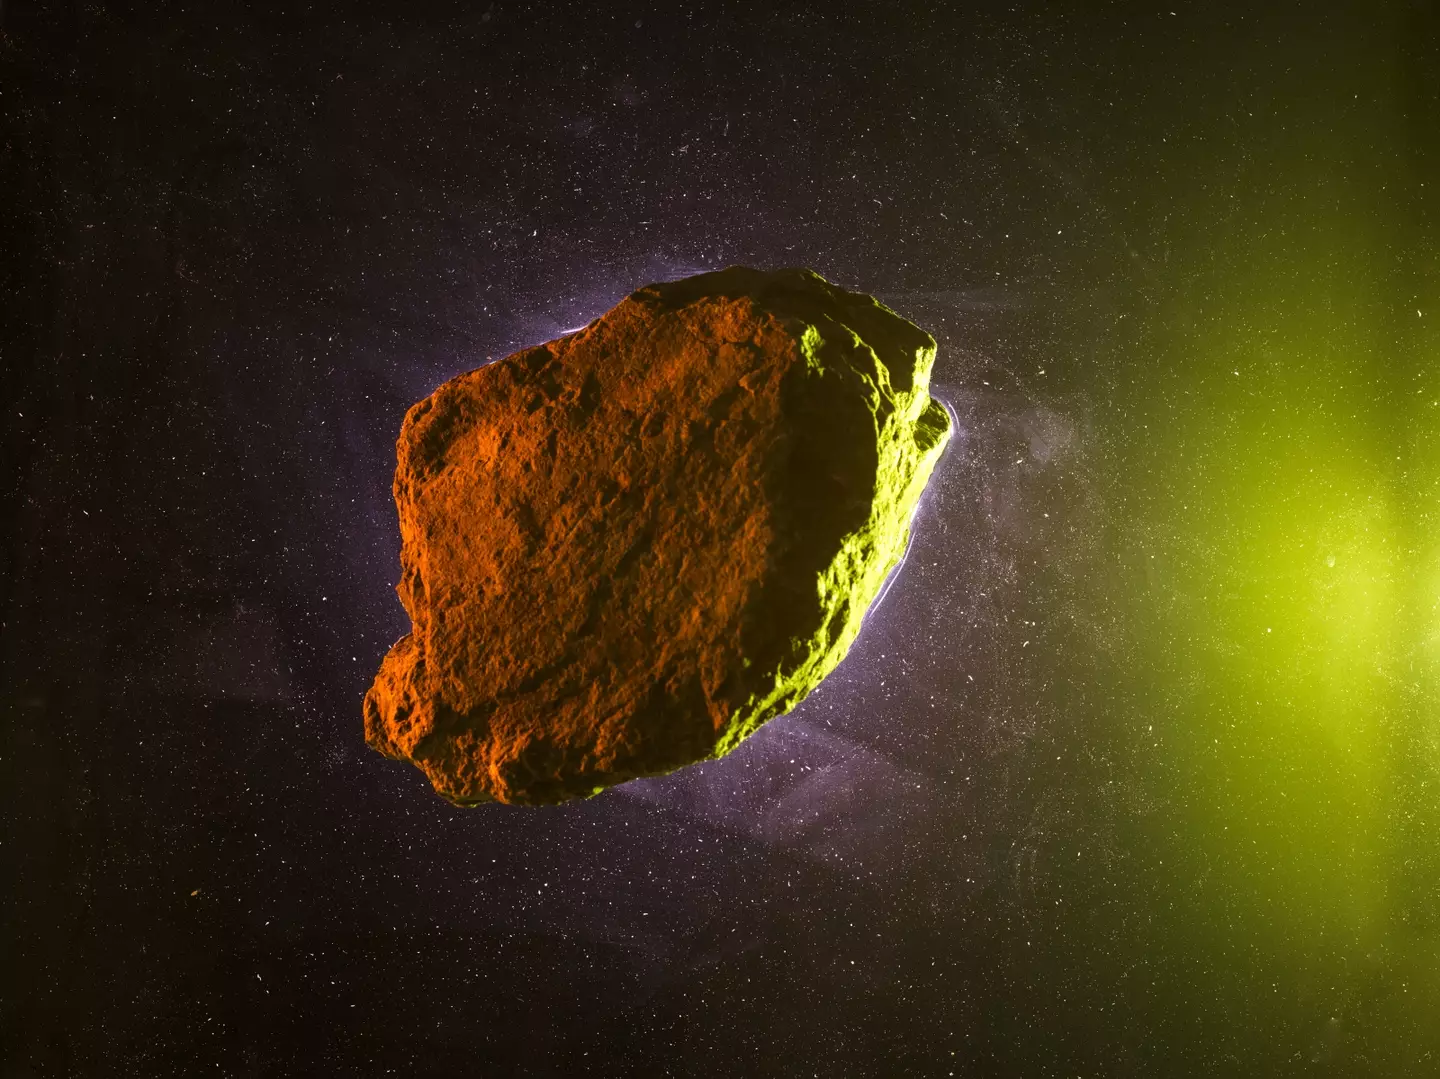 Is an asteroid currently hurtling towards us?